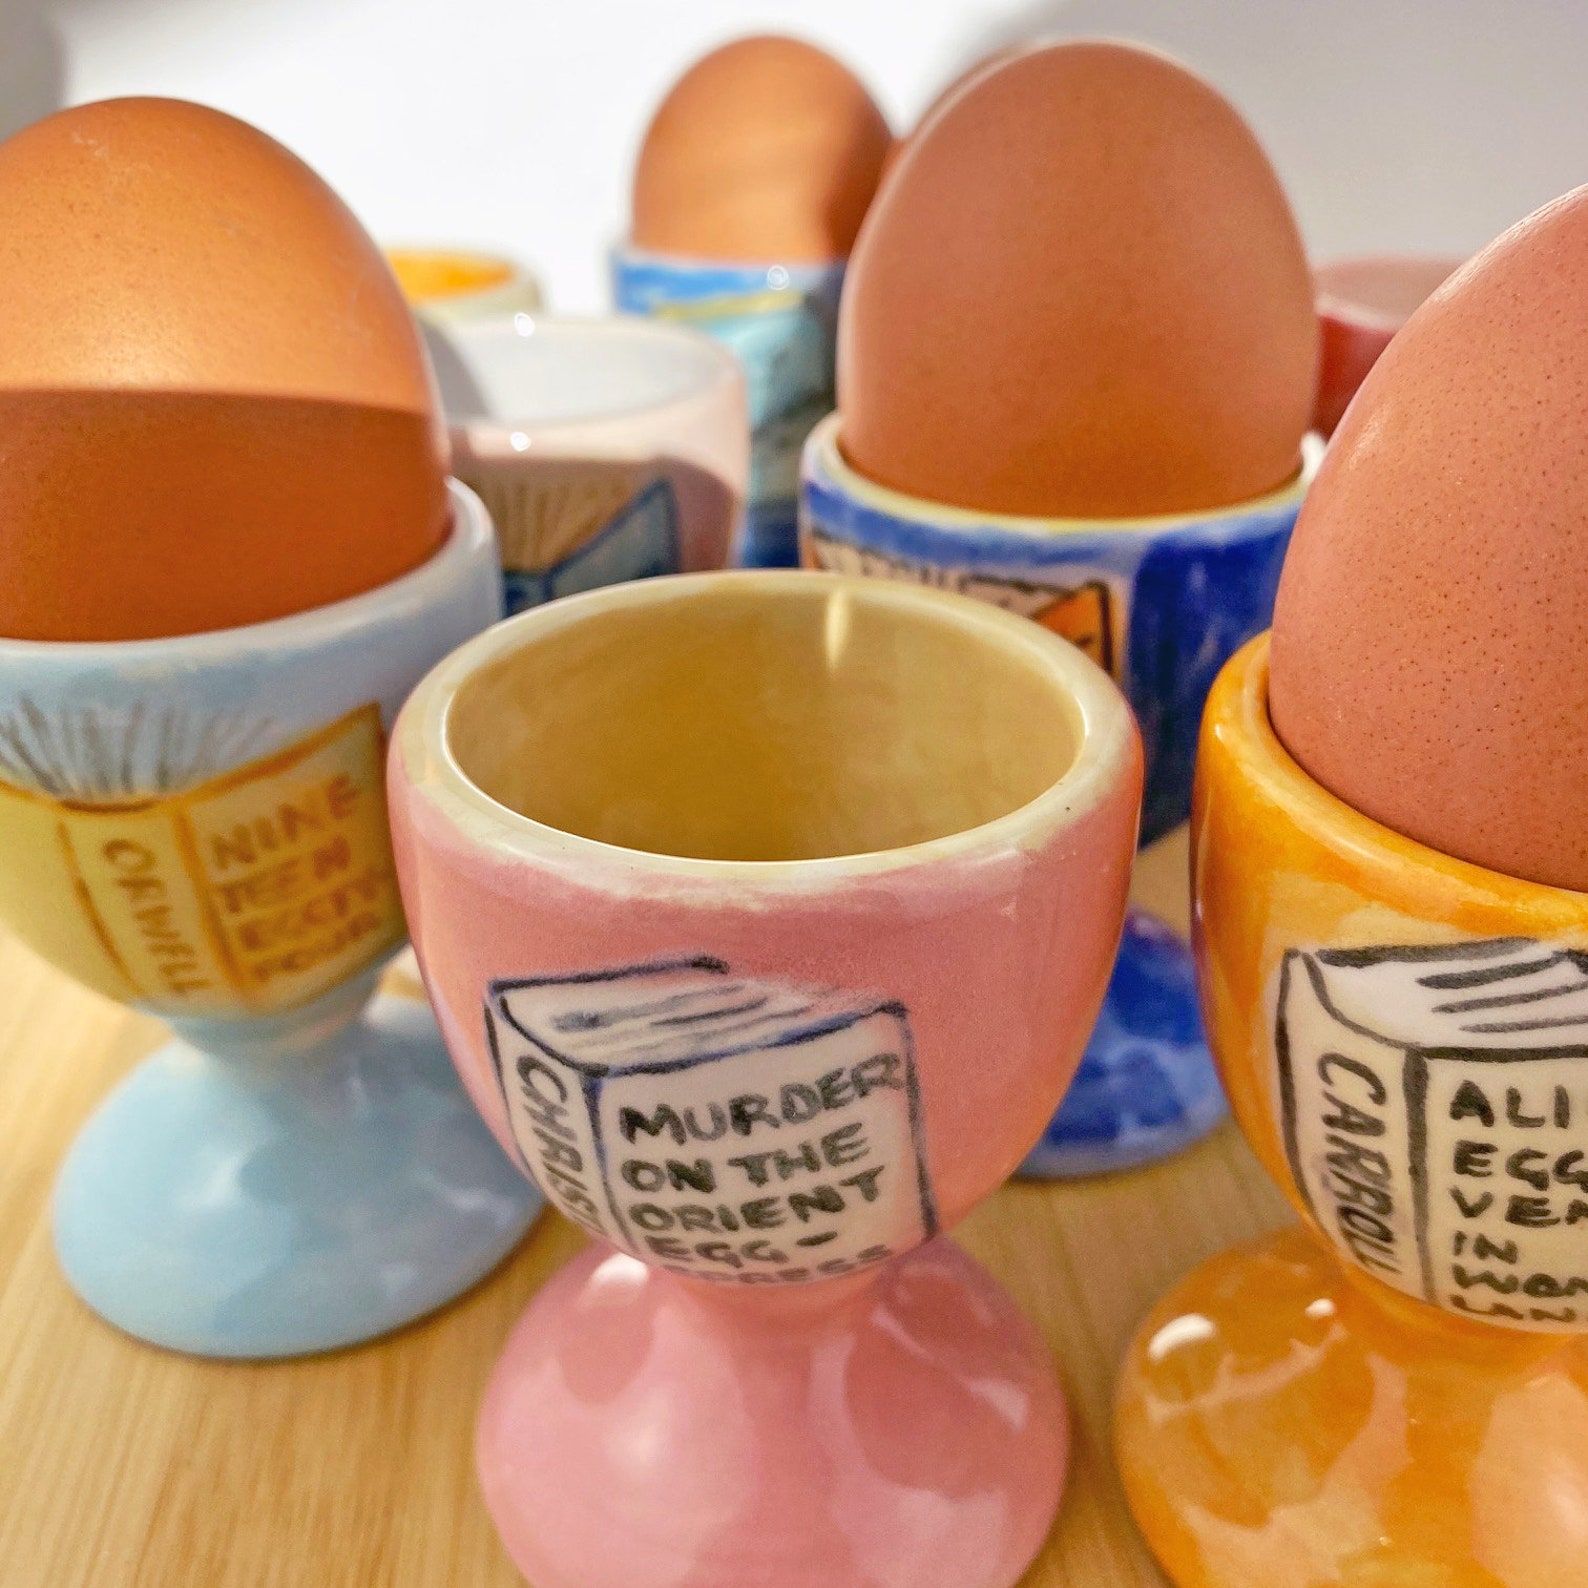 A photo of a group of painted eggs with egg-related book title puns. The egg cups are different colors and hand-painted.